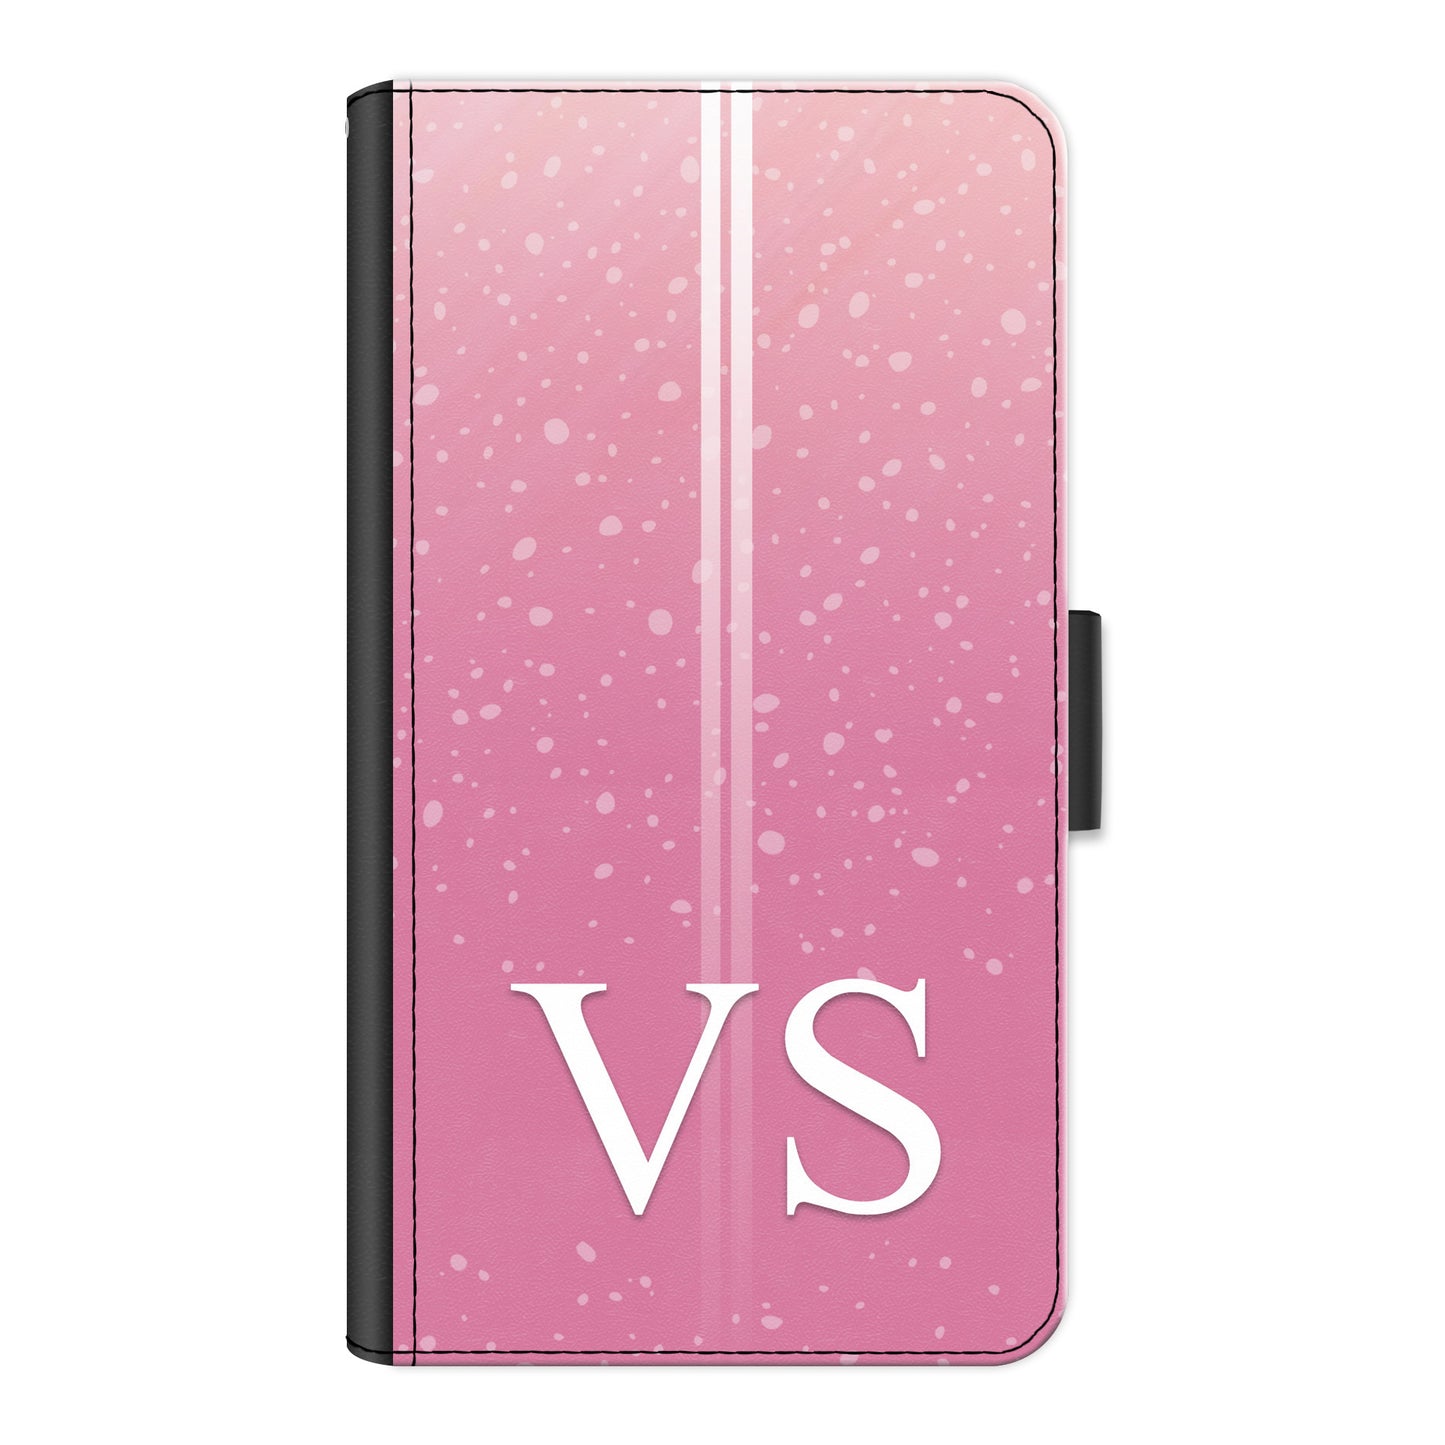 Personalised Sony Phone Leather Wallet with White Initials, Pin Stripes and Droplets on Pink